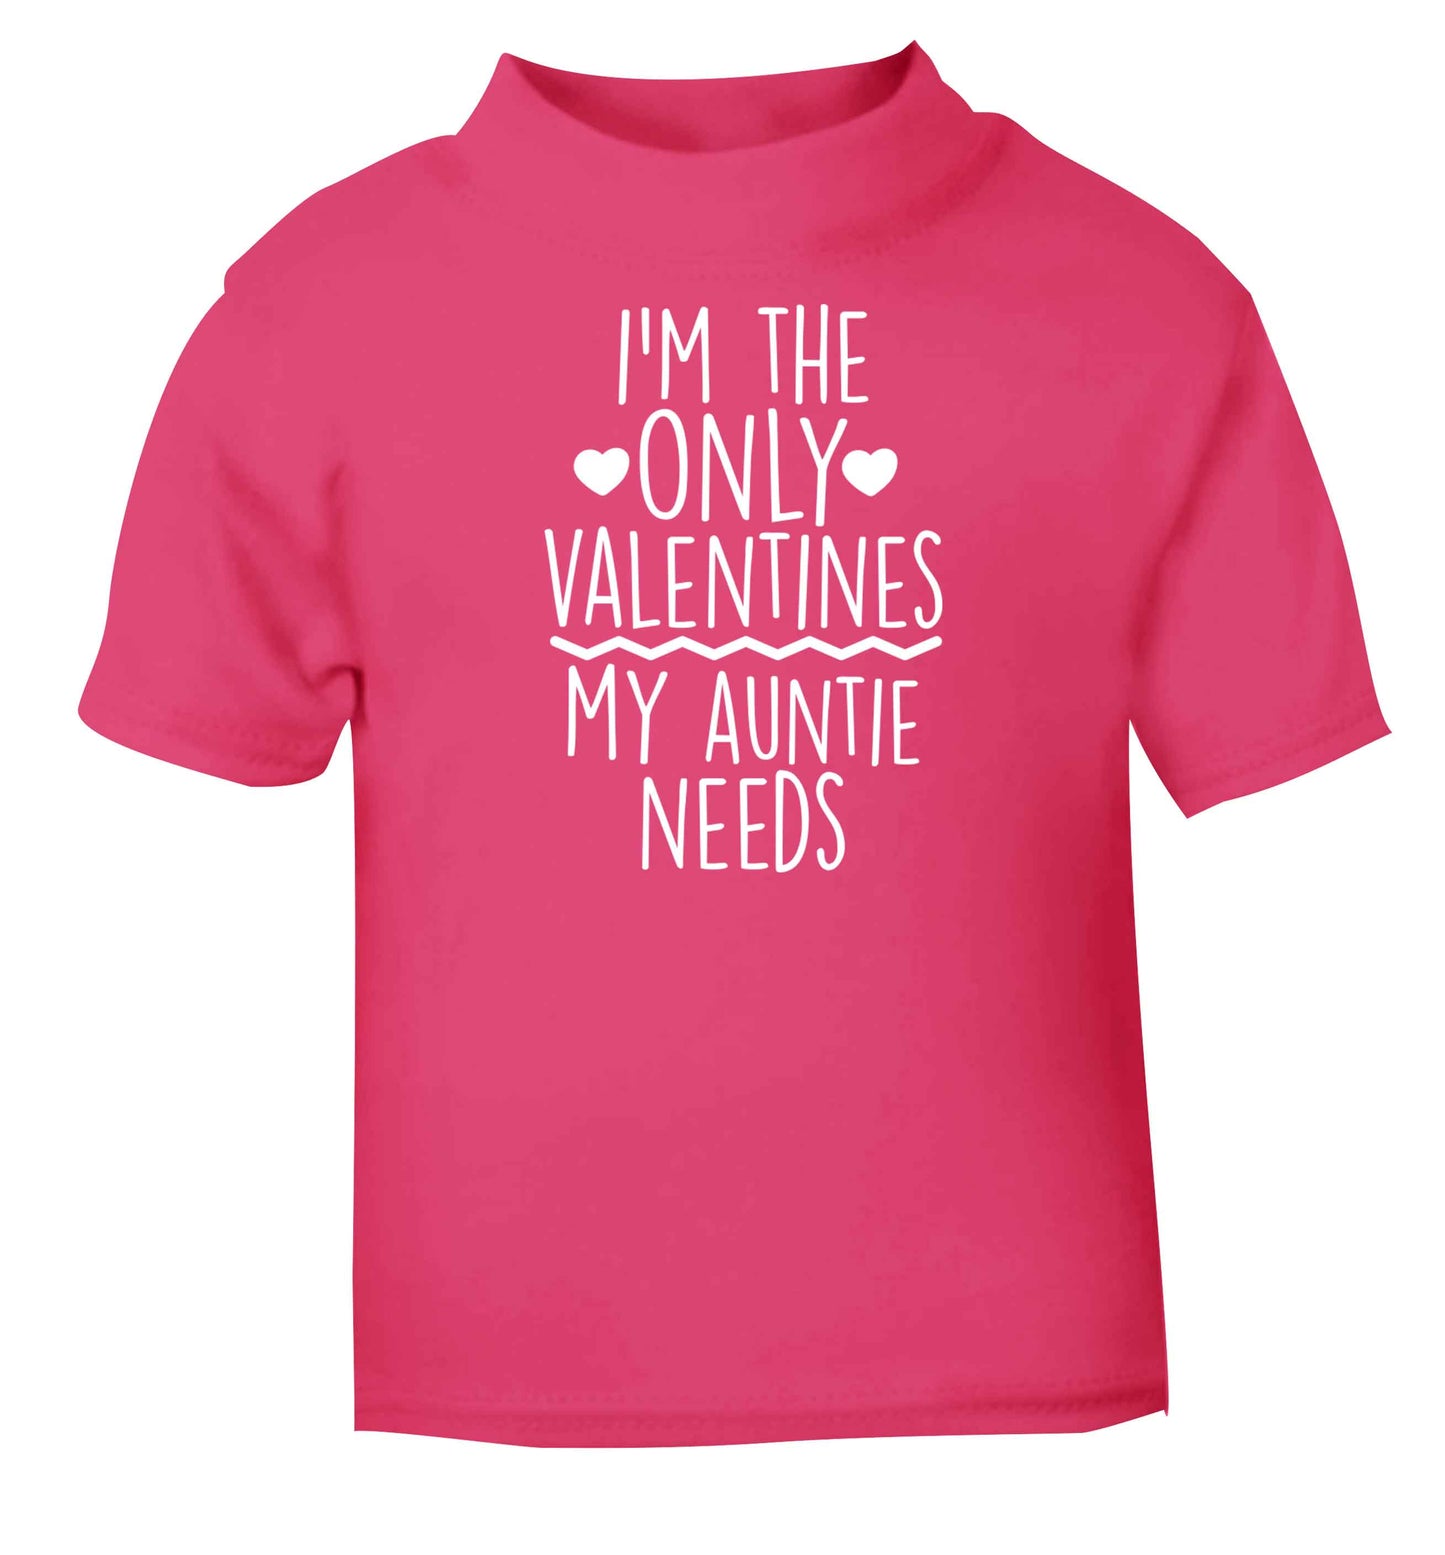 I'm the only valentines my auntie needs pink baby toddler Tshirt 2 Years